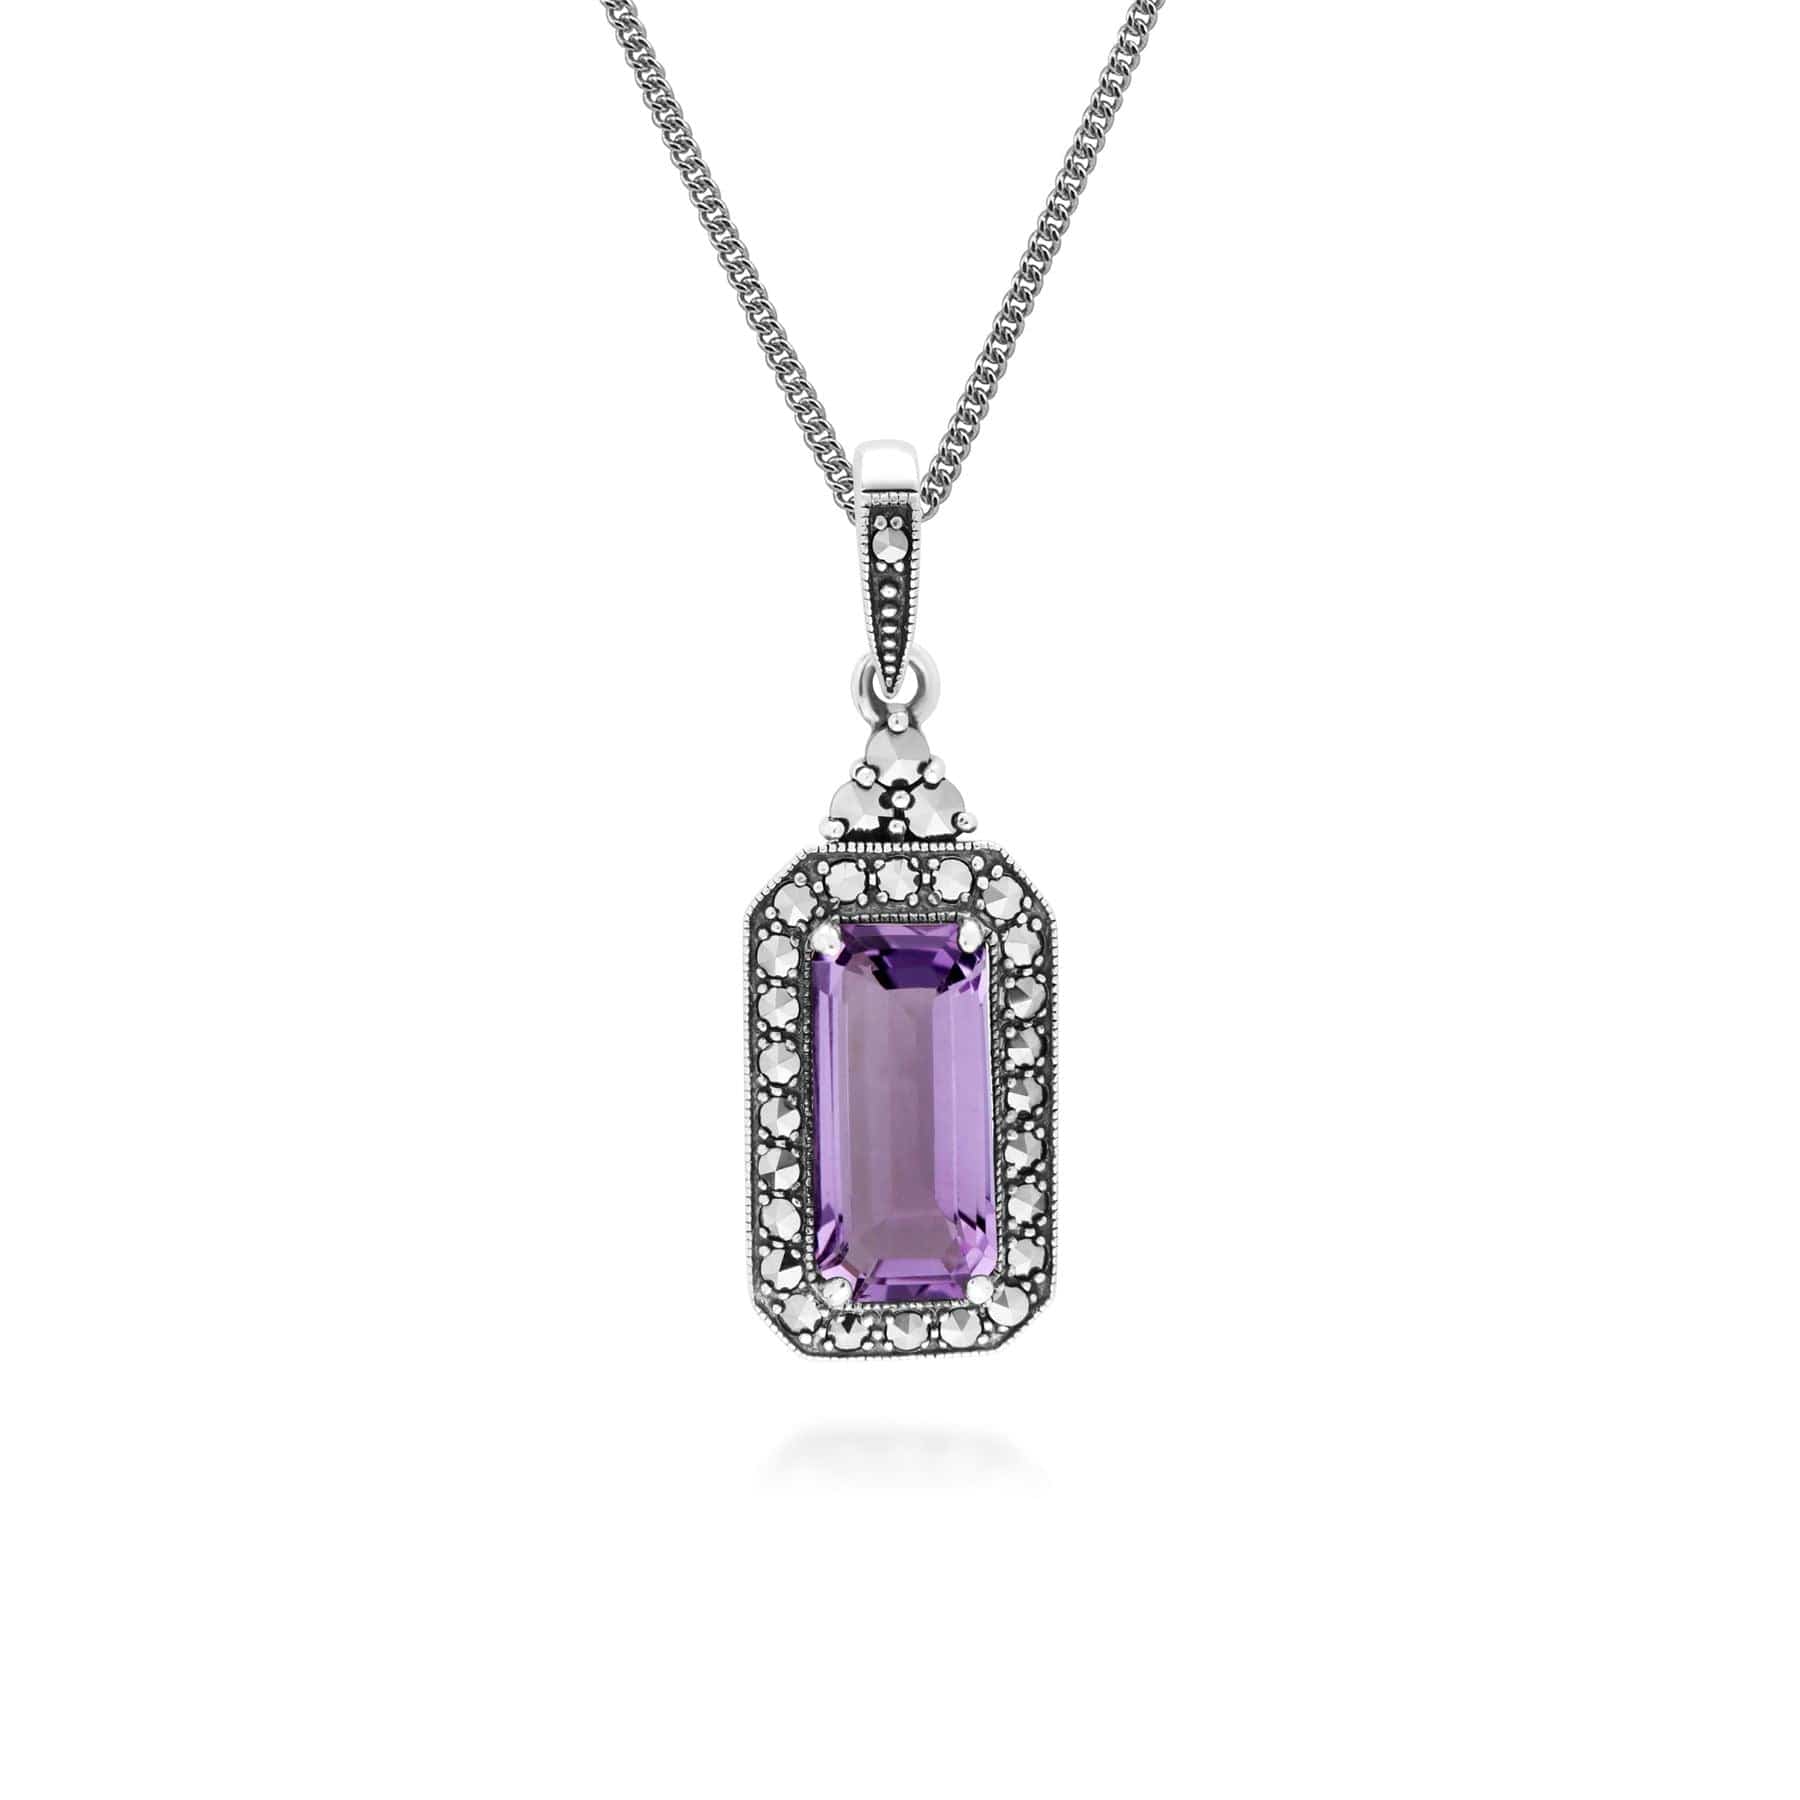 Image of Art Deco Inspired Octagon Cut Amethyst & Marcasite Pendant Necklace in Sterling Silver